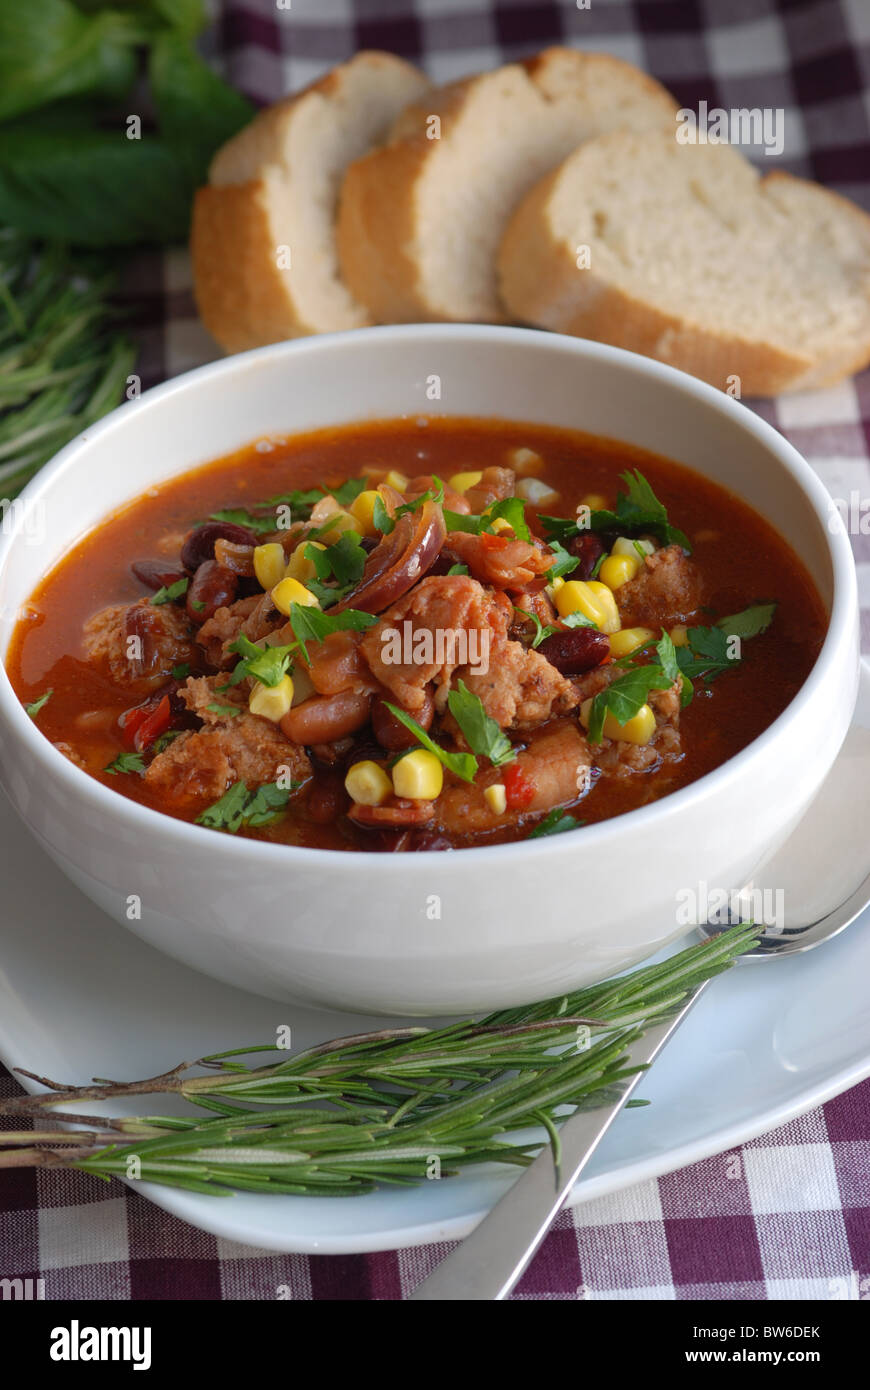 Spicy Italian bean and sausage casserole Stock Photo